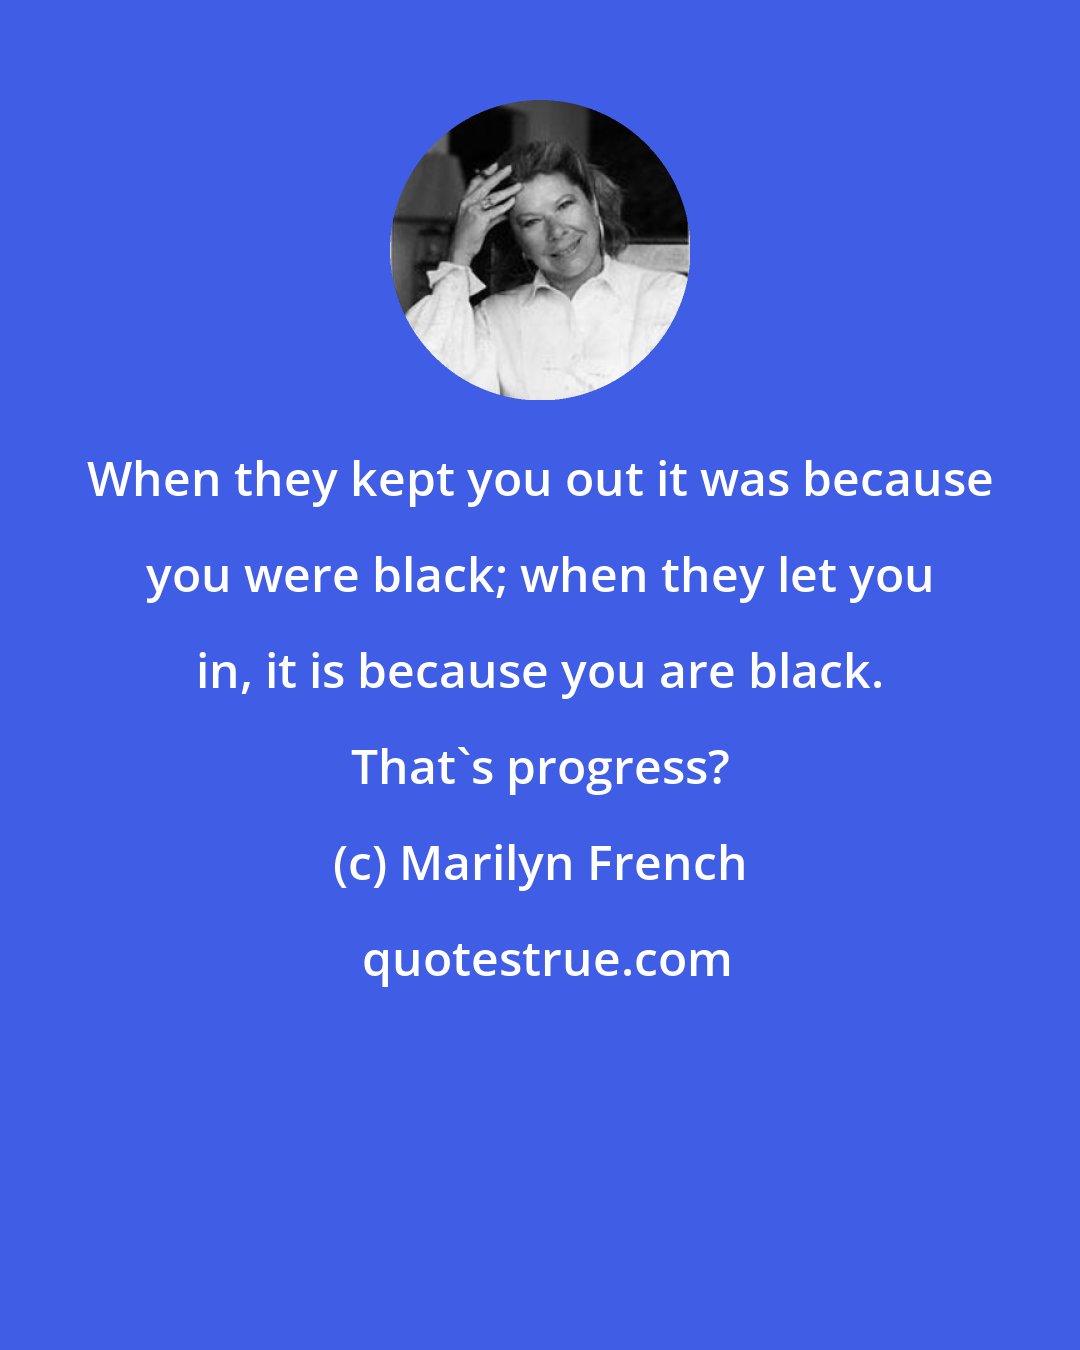 Marilyn French: When they kept you out it was because you were black; when they let you in, it is because you are black. That's progress?